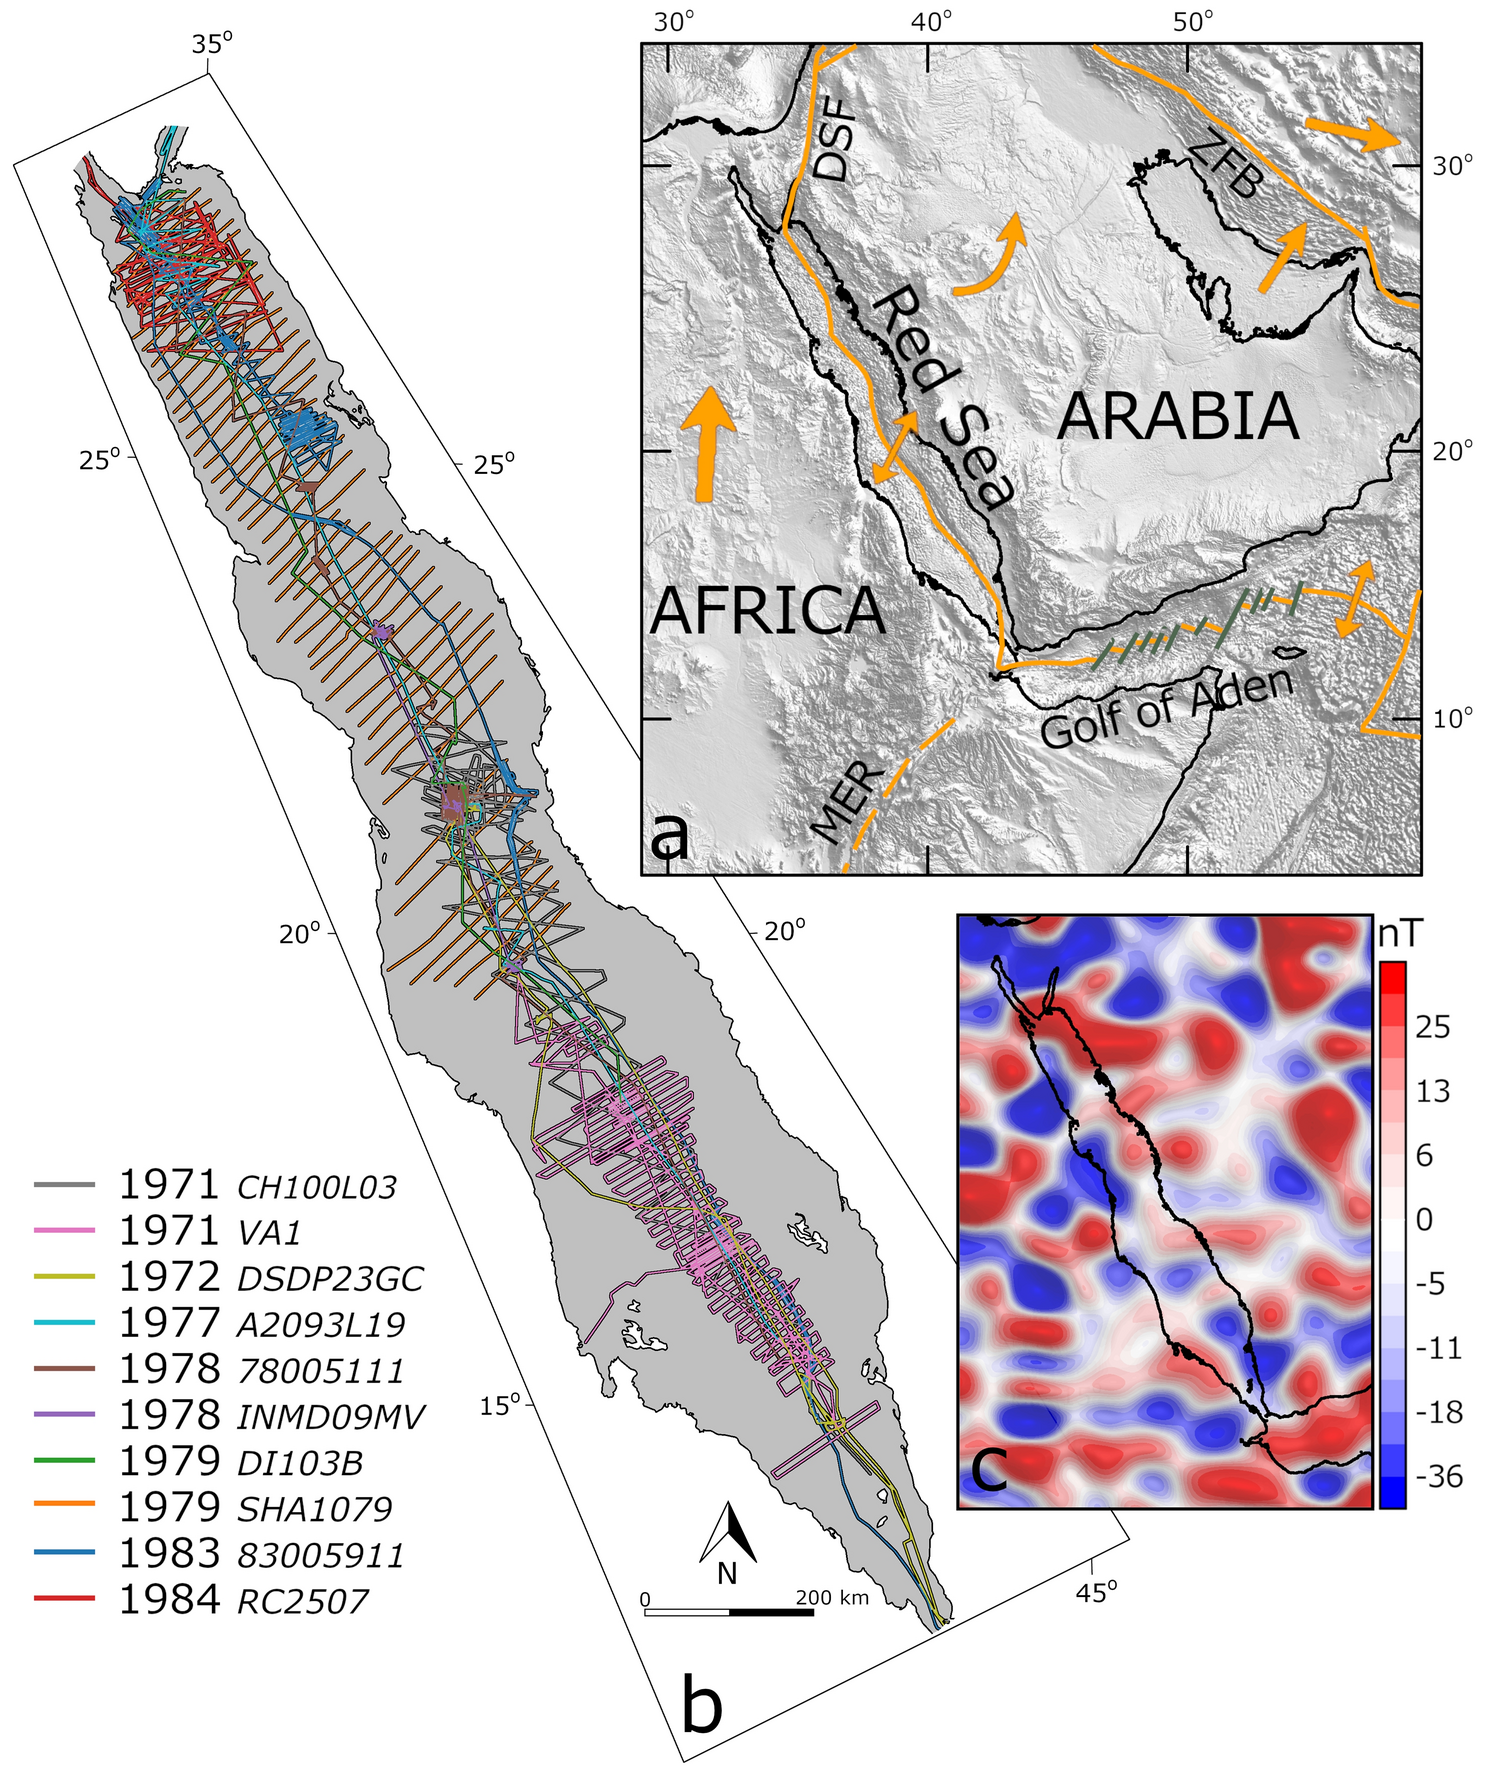 New magnetic anomaly map for the Red Sea reveals transtensional structures  associated with rotational rifting | Scientific Reports